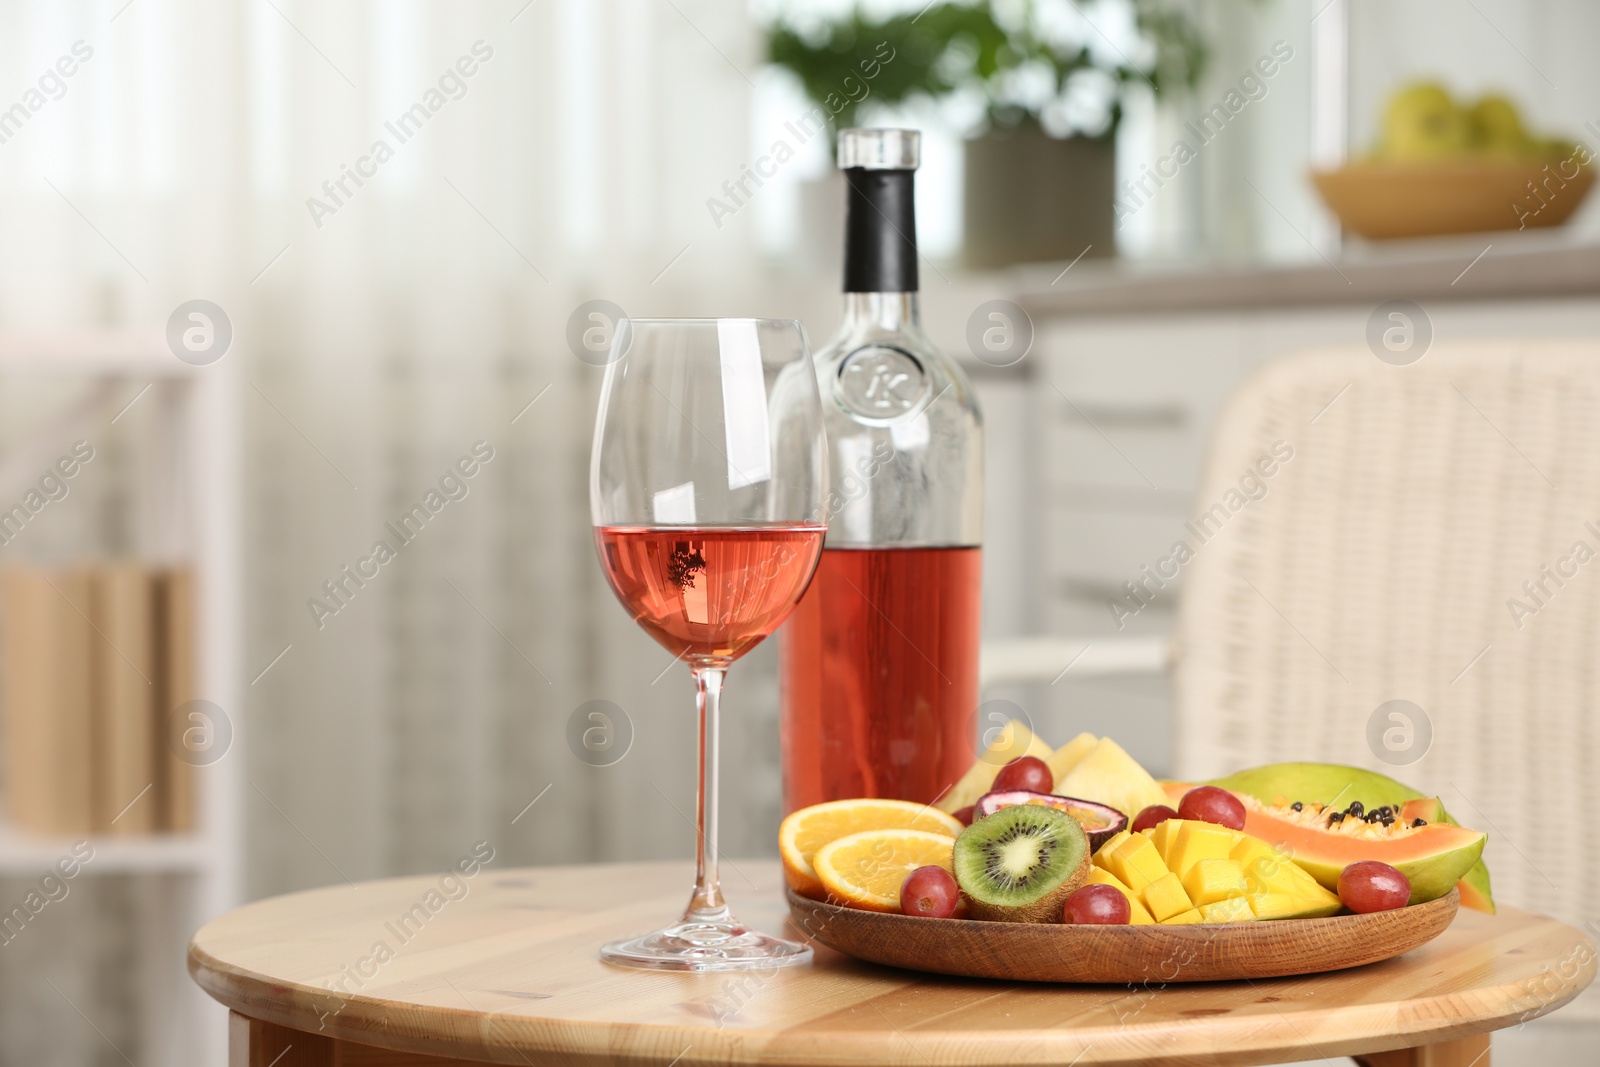 Photo of Delicious exotic fruits and wine on wooden table indoors